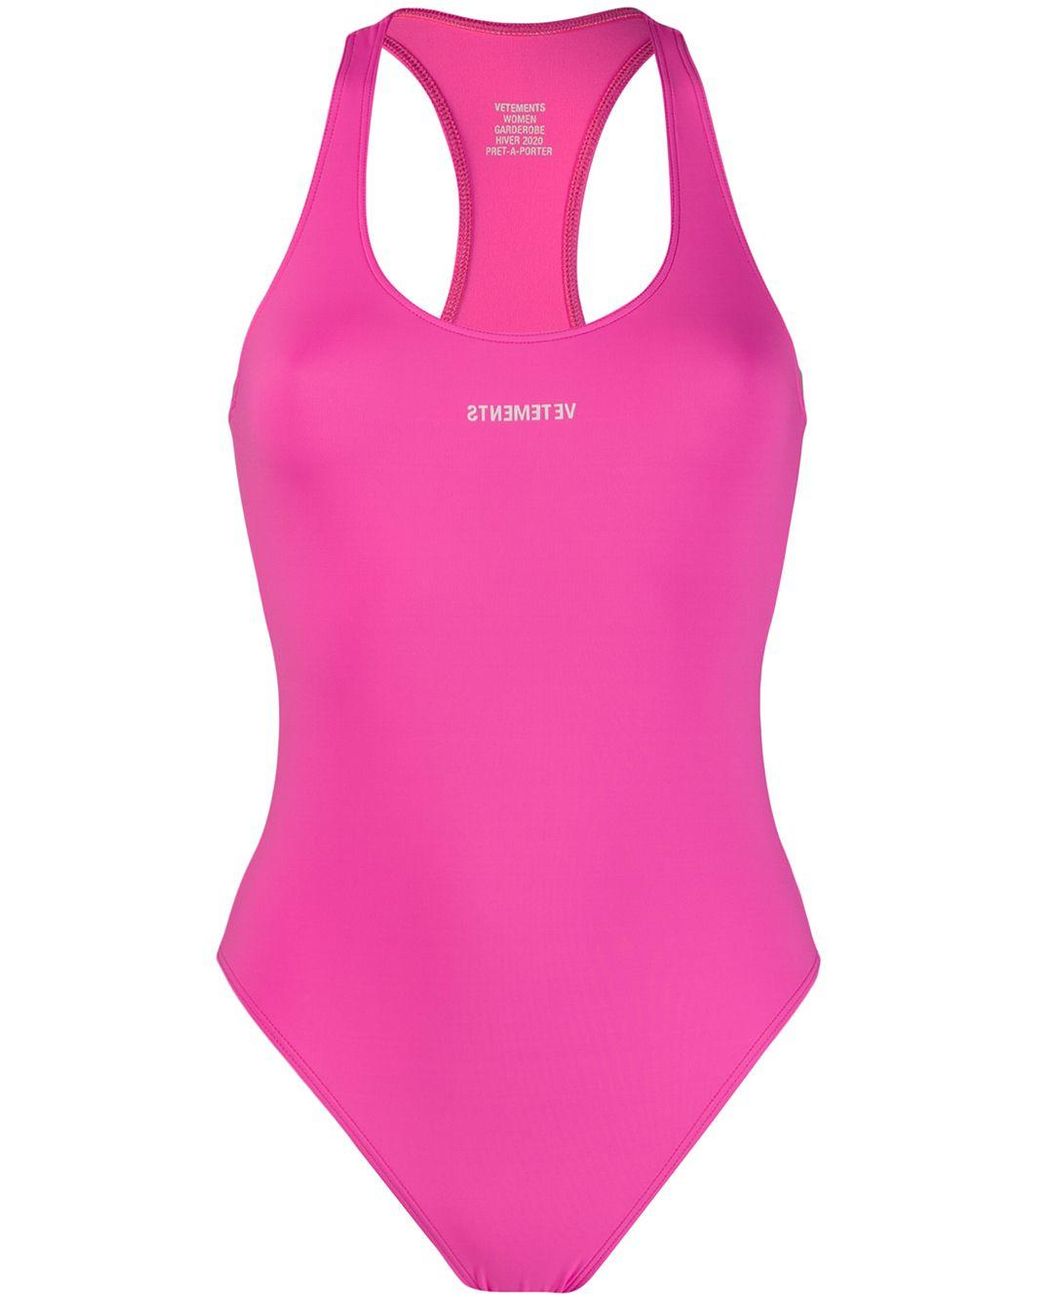 Vetements Synthetic Baywatch Reverse Logo-printed Swimsuit in Pink - Lyst